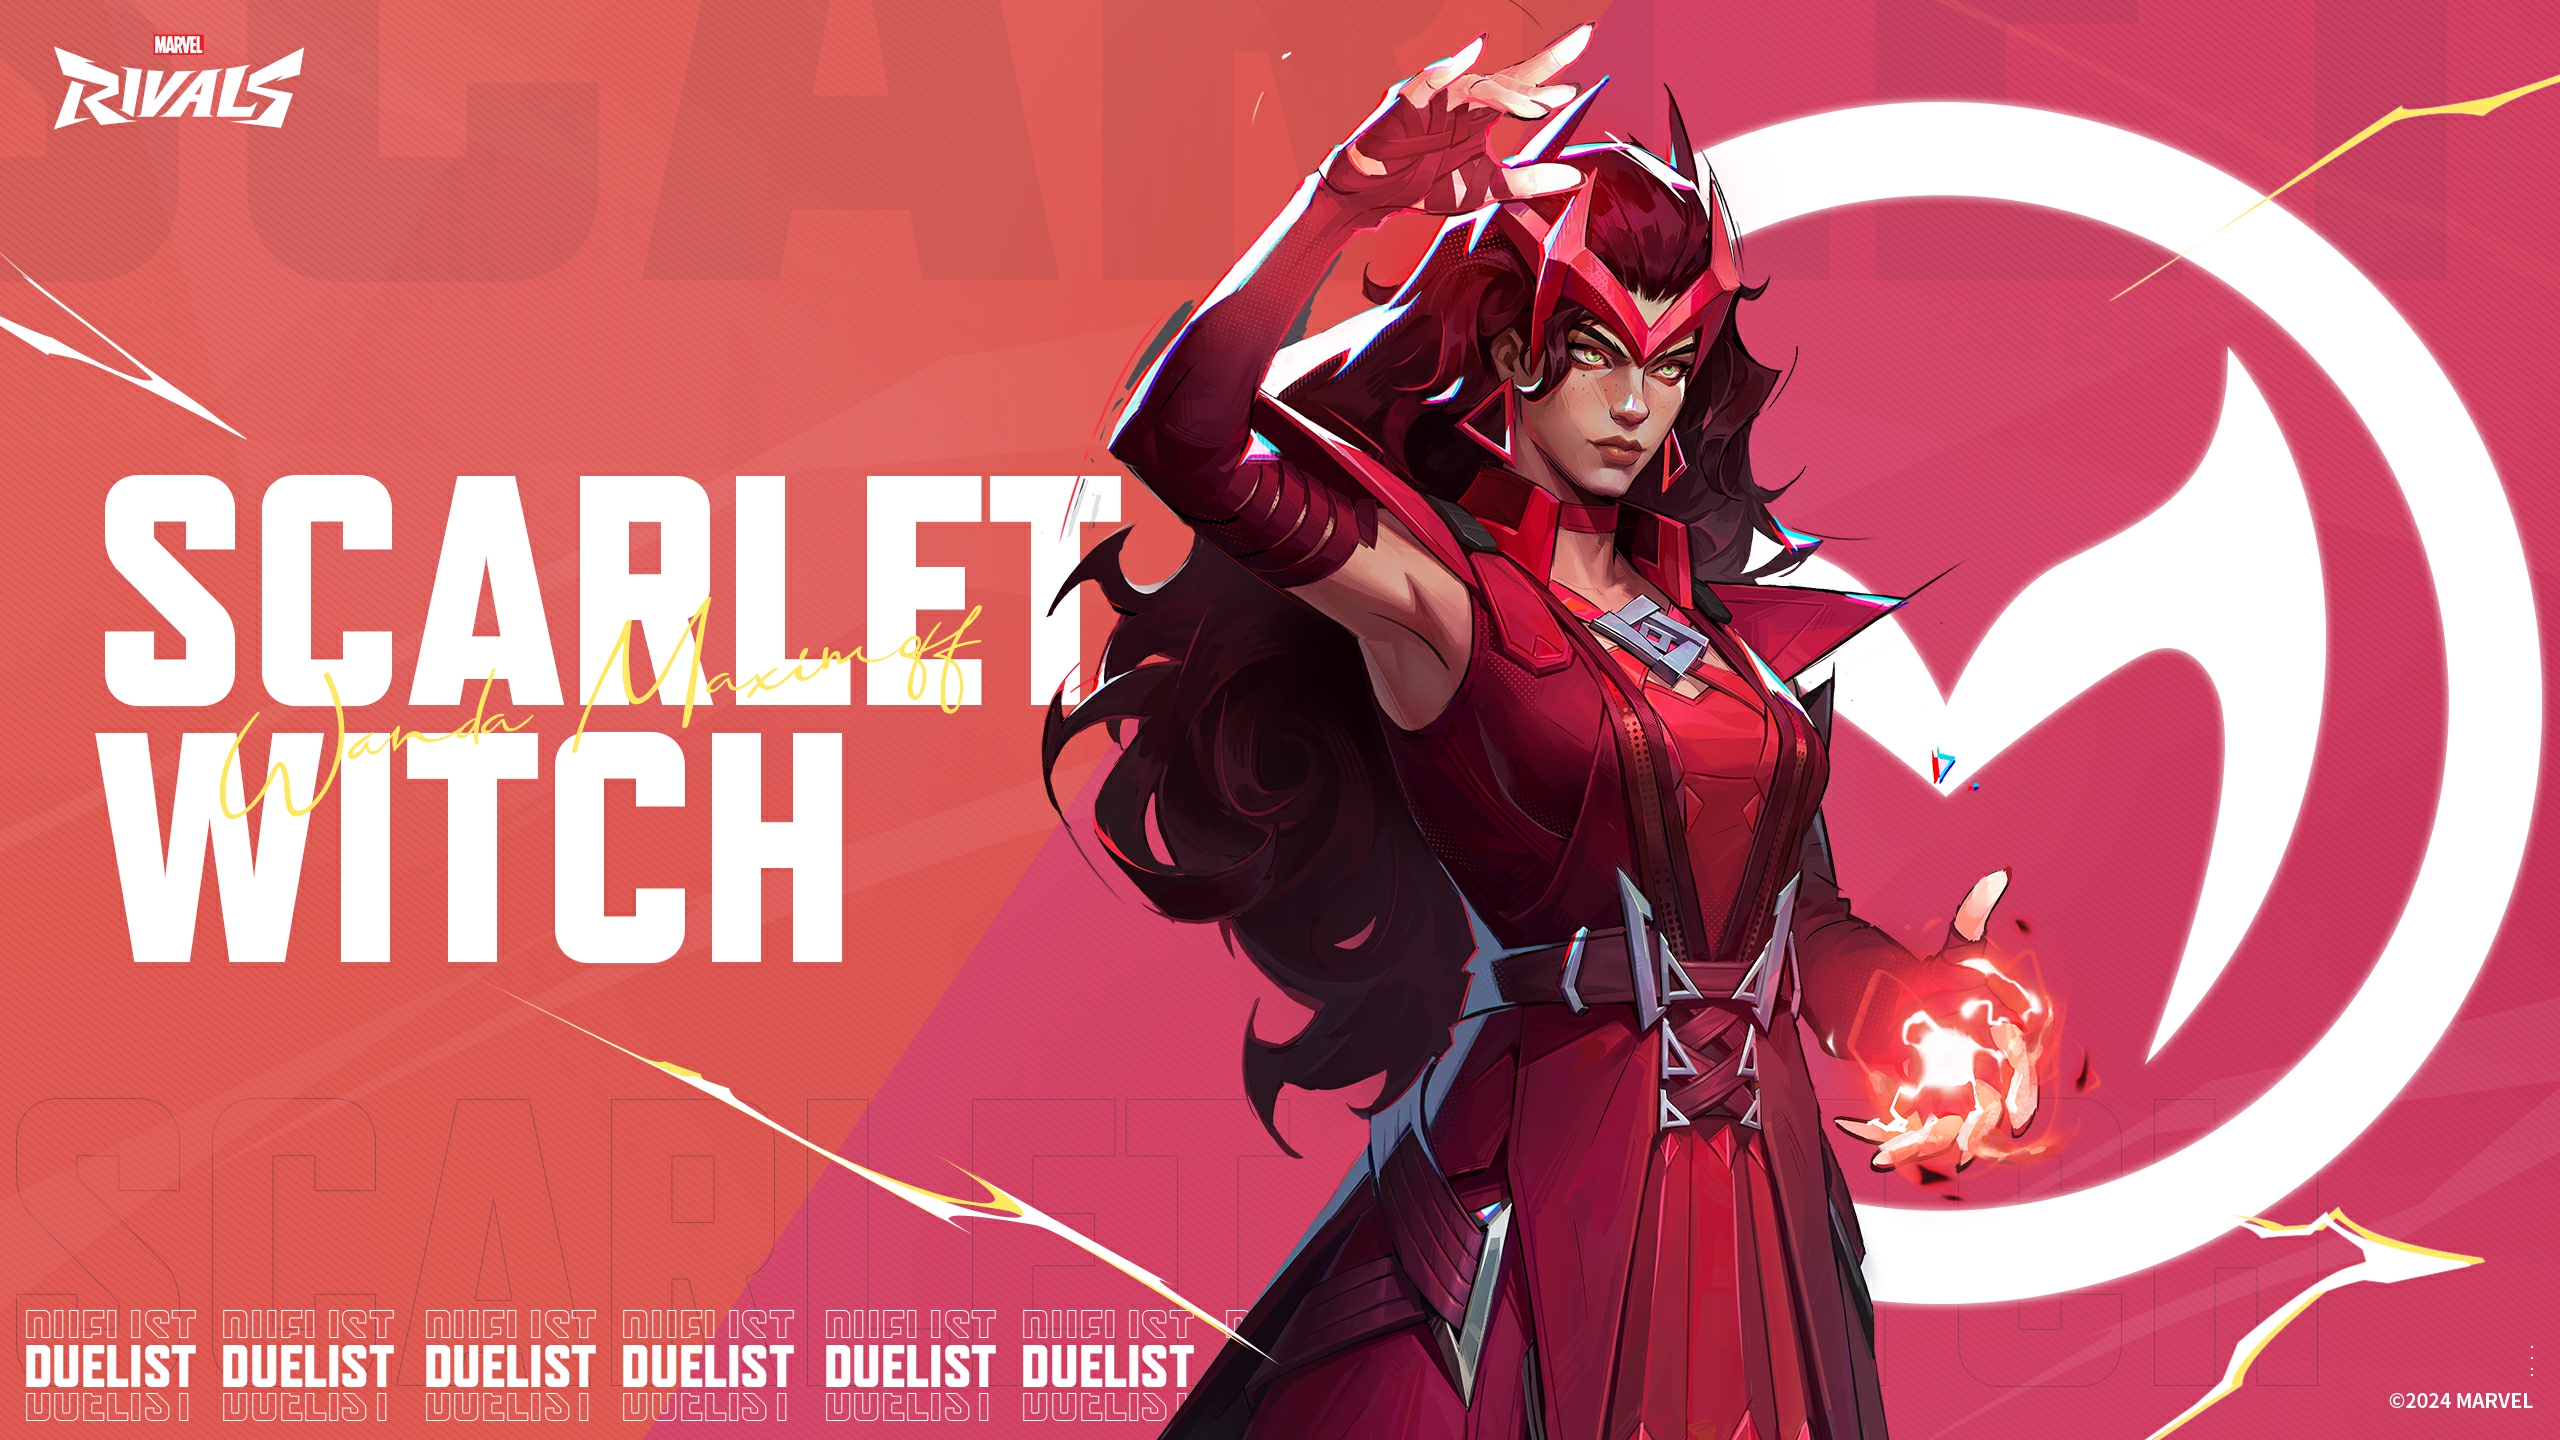 General 2560x1440 Marvel Rivals Scarlet Witch text video game characters comic character comic art comics